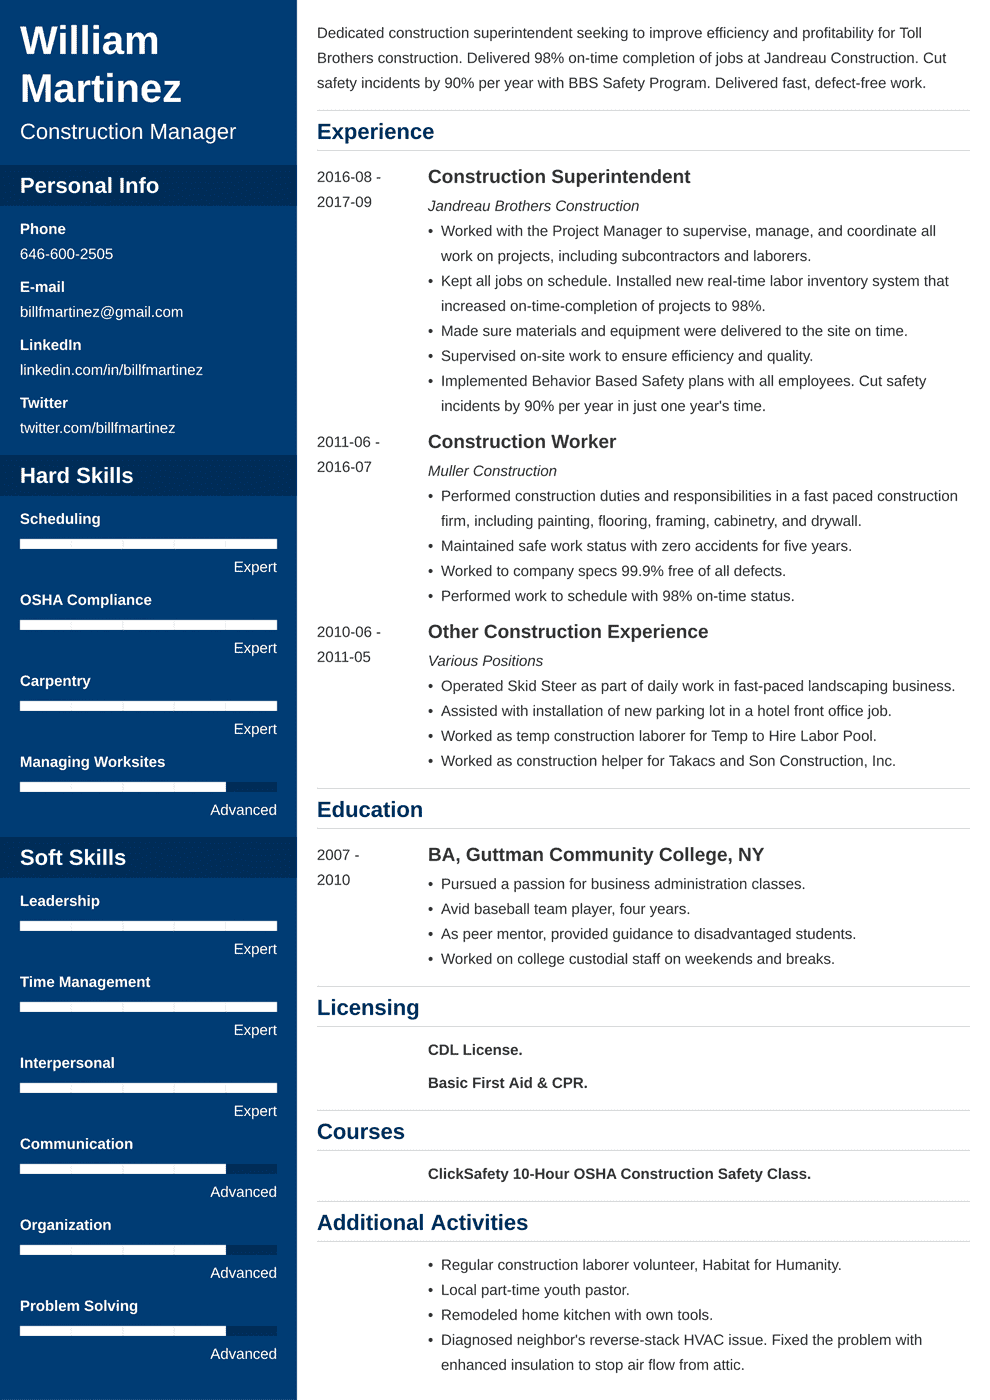 Construction Worker Resume Examples (Template & Skills)